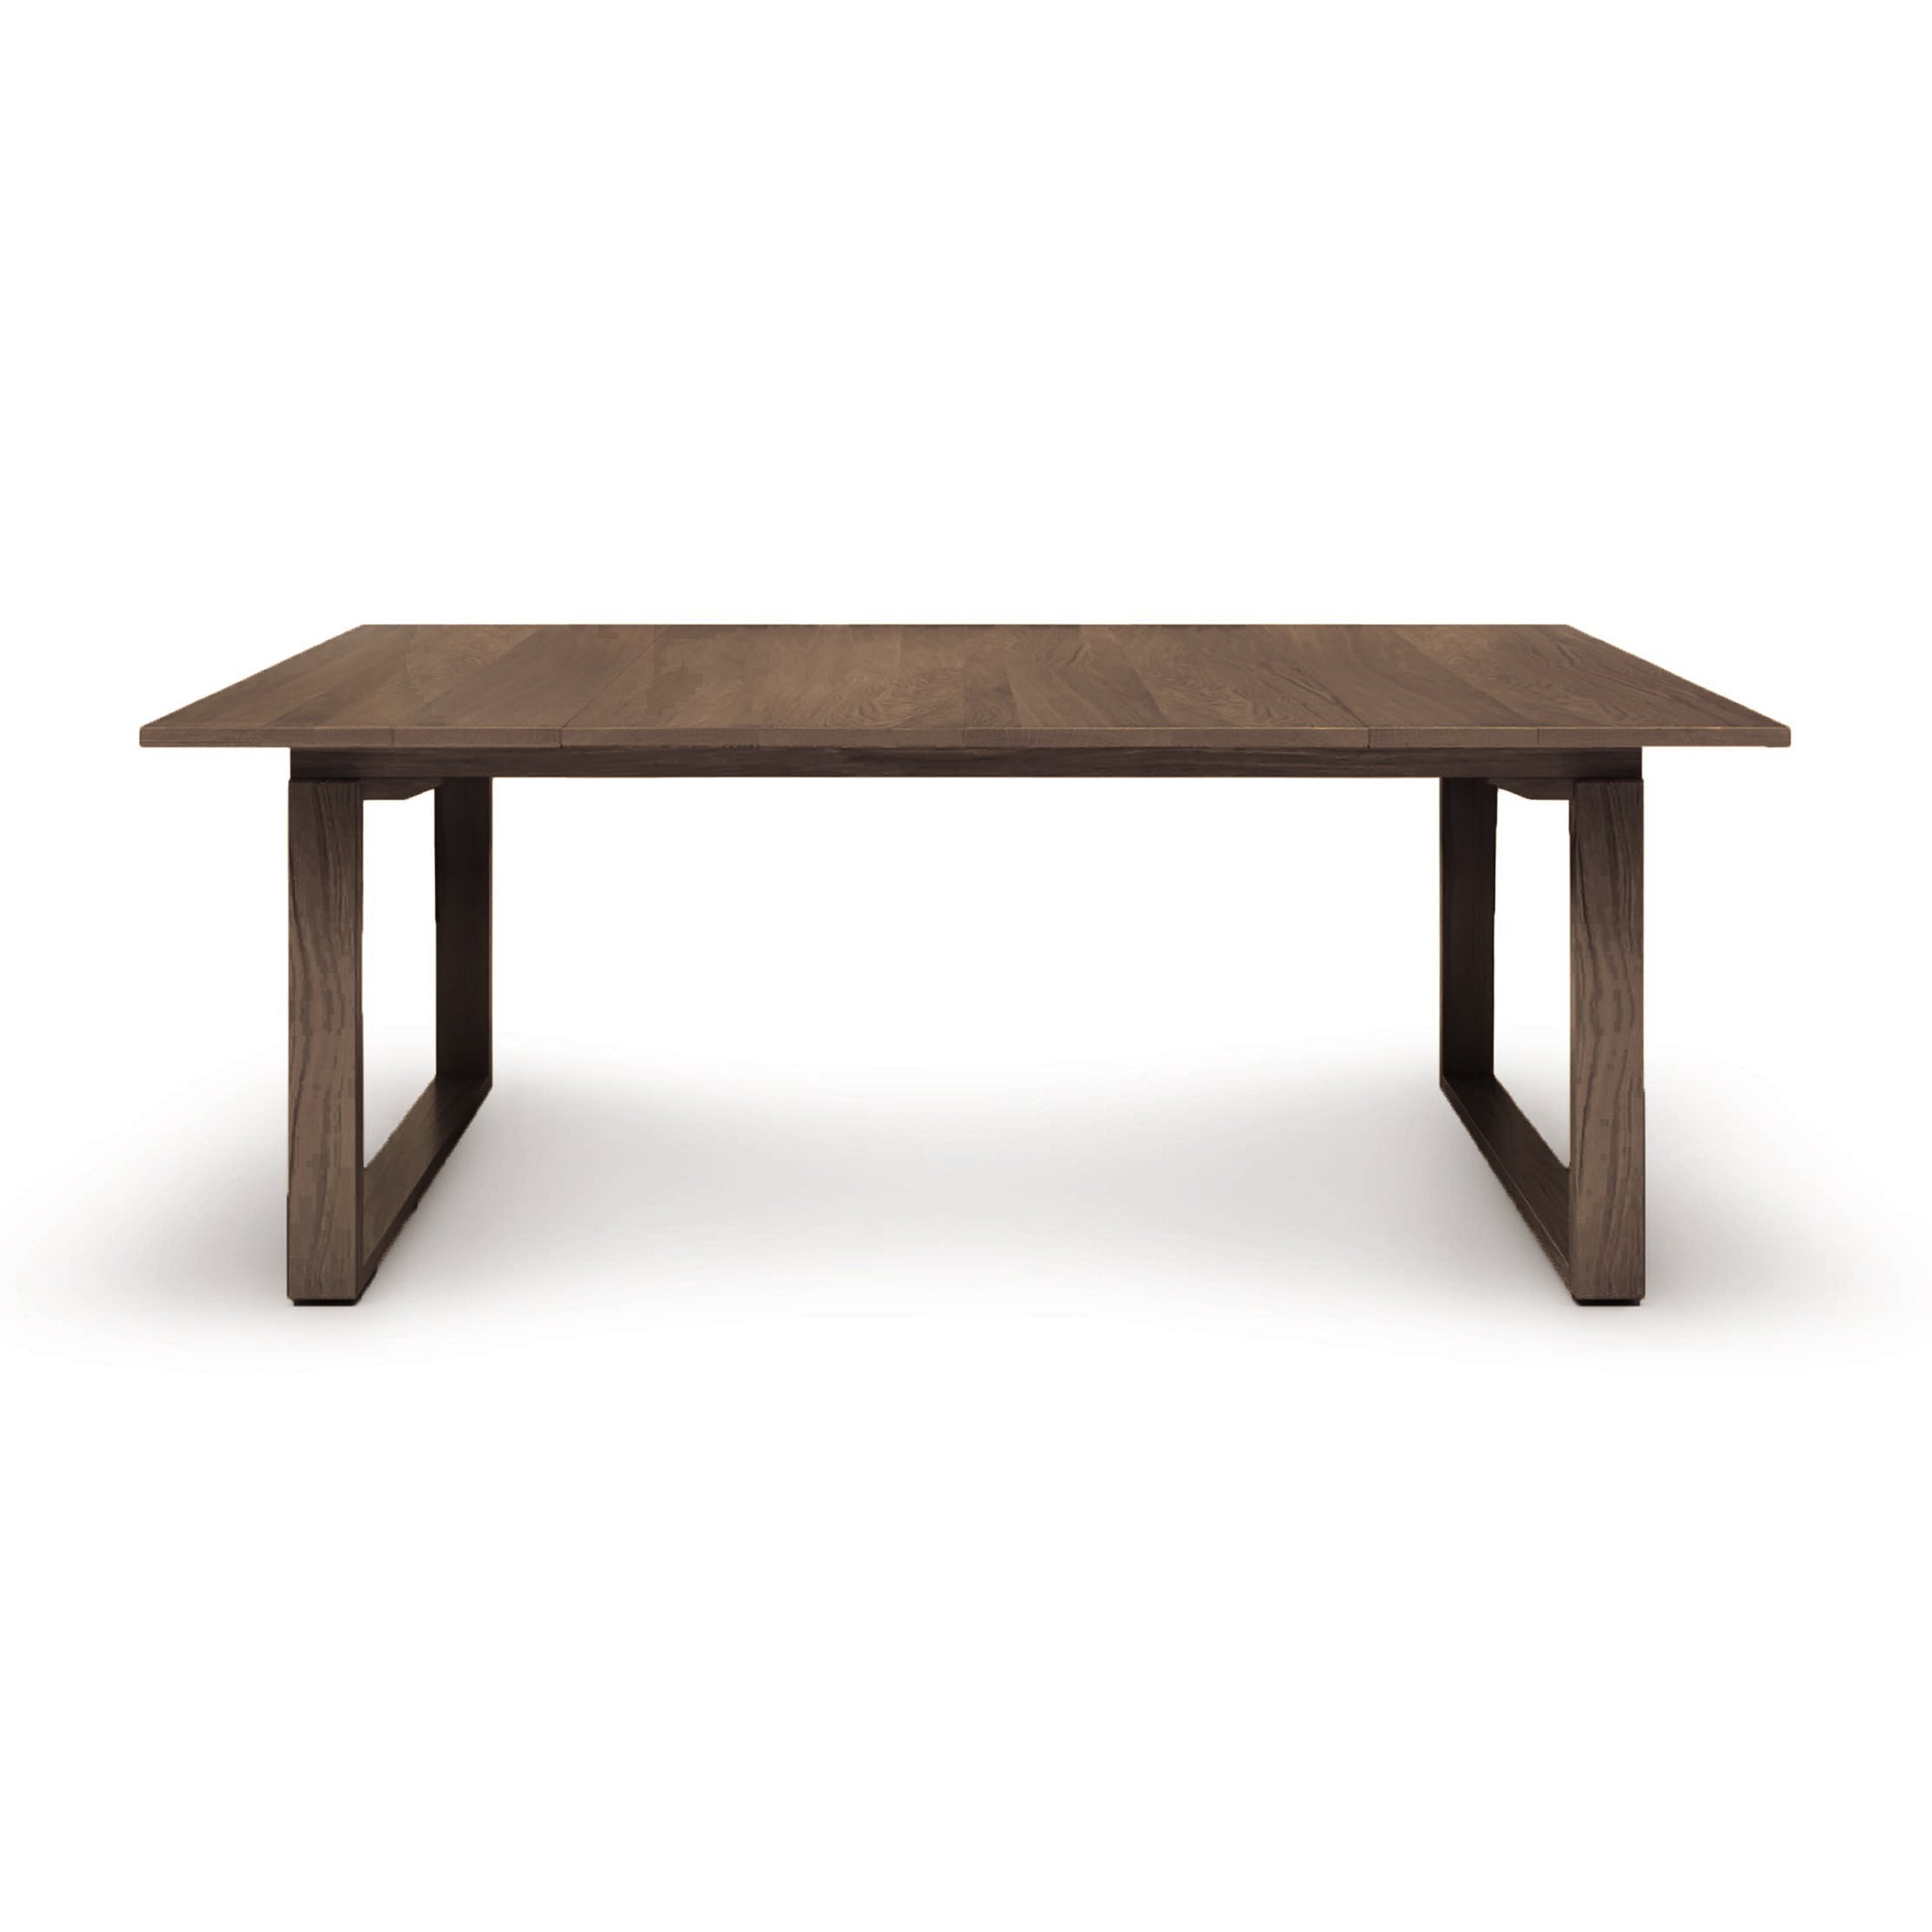 A simple Iso Extension Dining Table by Copeland Furniture, with a rectangular top and sturdy legs made of solid oak wood, isolated on a white background.